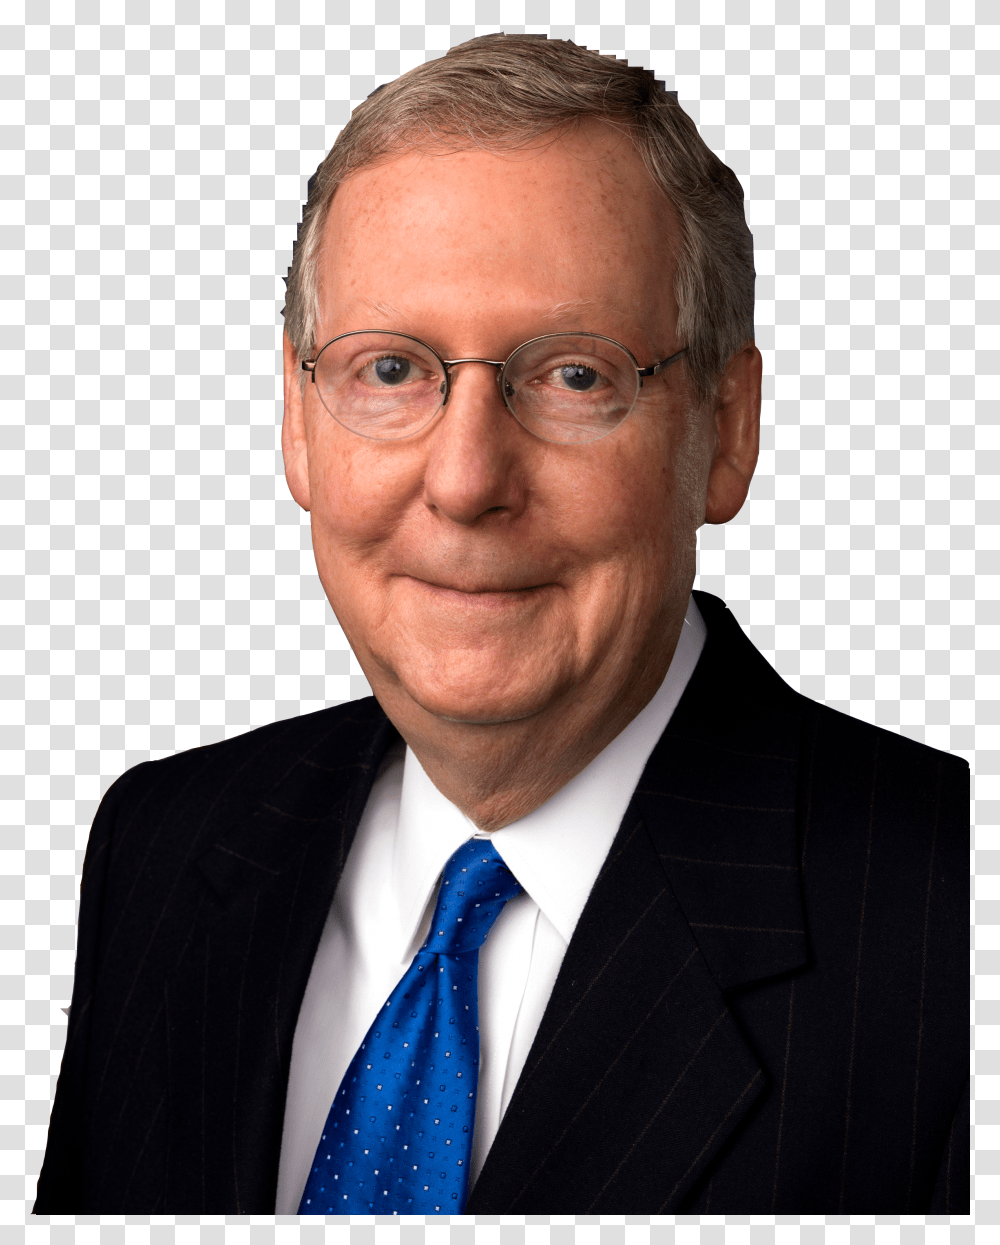 George W Bush Mitch Mcconnell Transparent Png